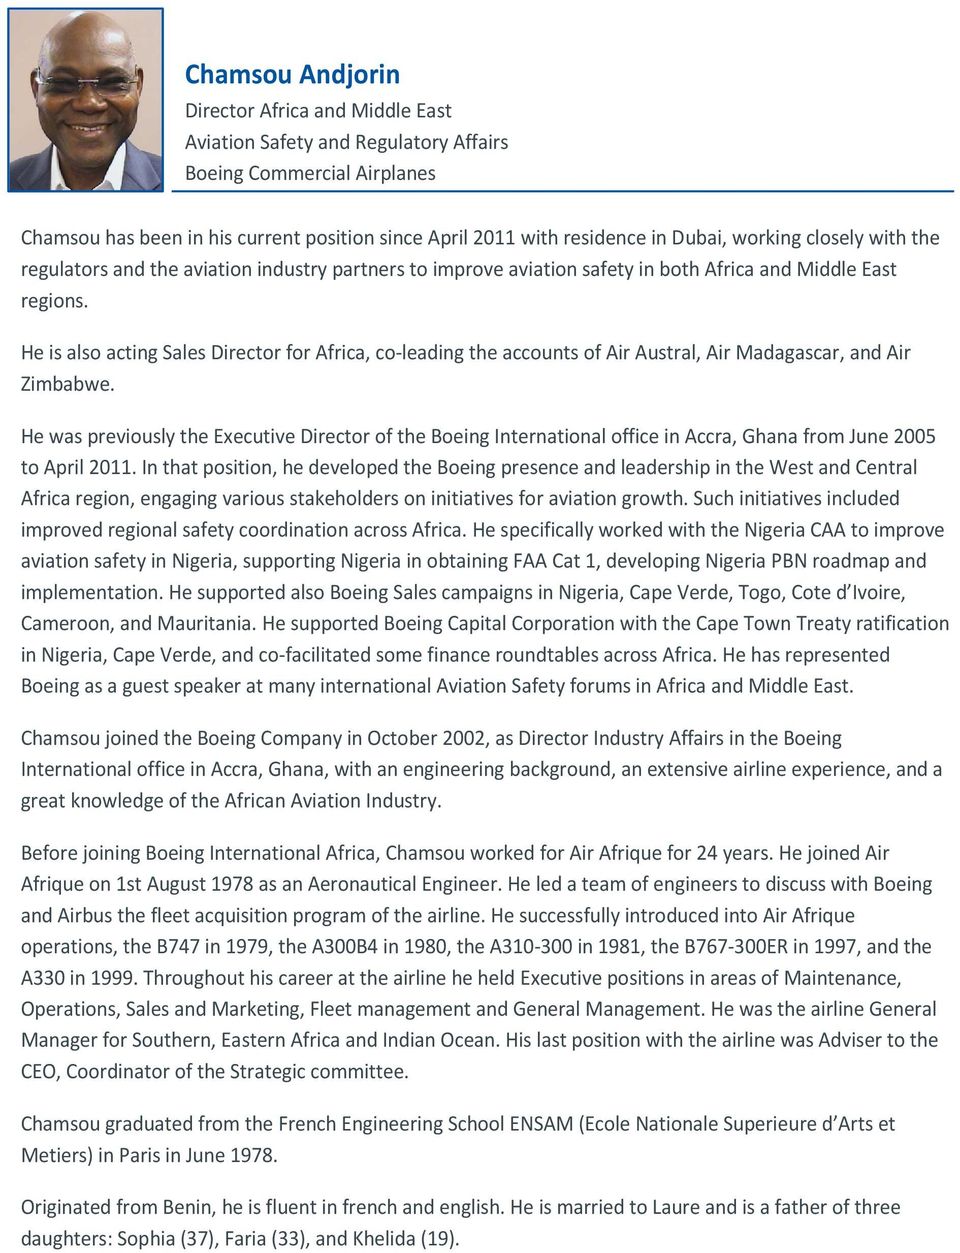 He is also acting Sales Director for Africa, co-leading the accounts of Air Austral, Air Madagascar, and Air Zimbabwe.